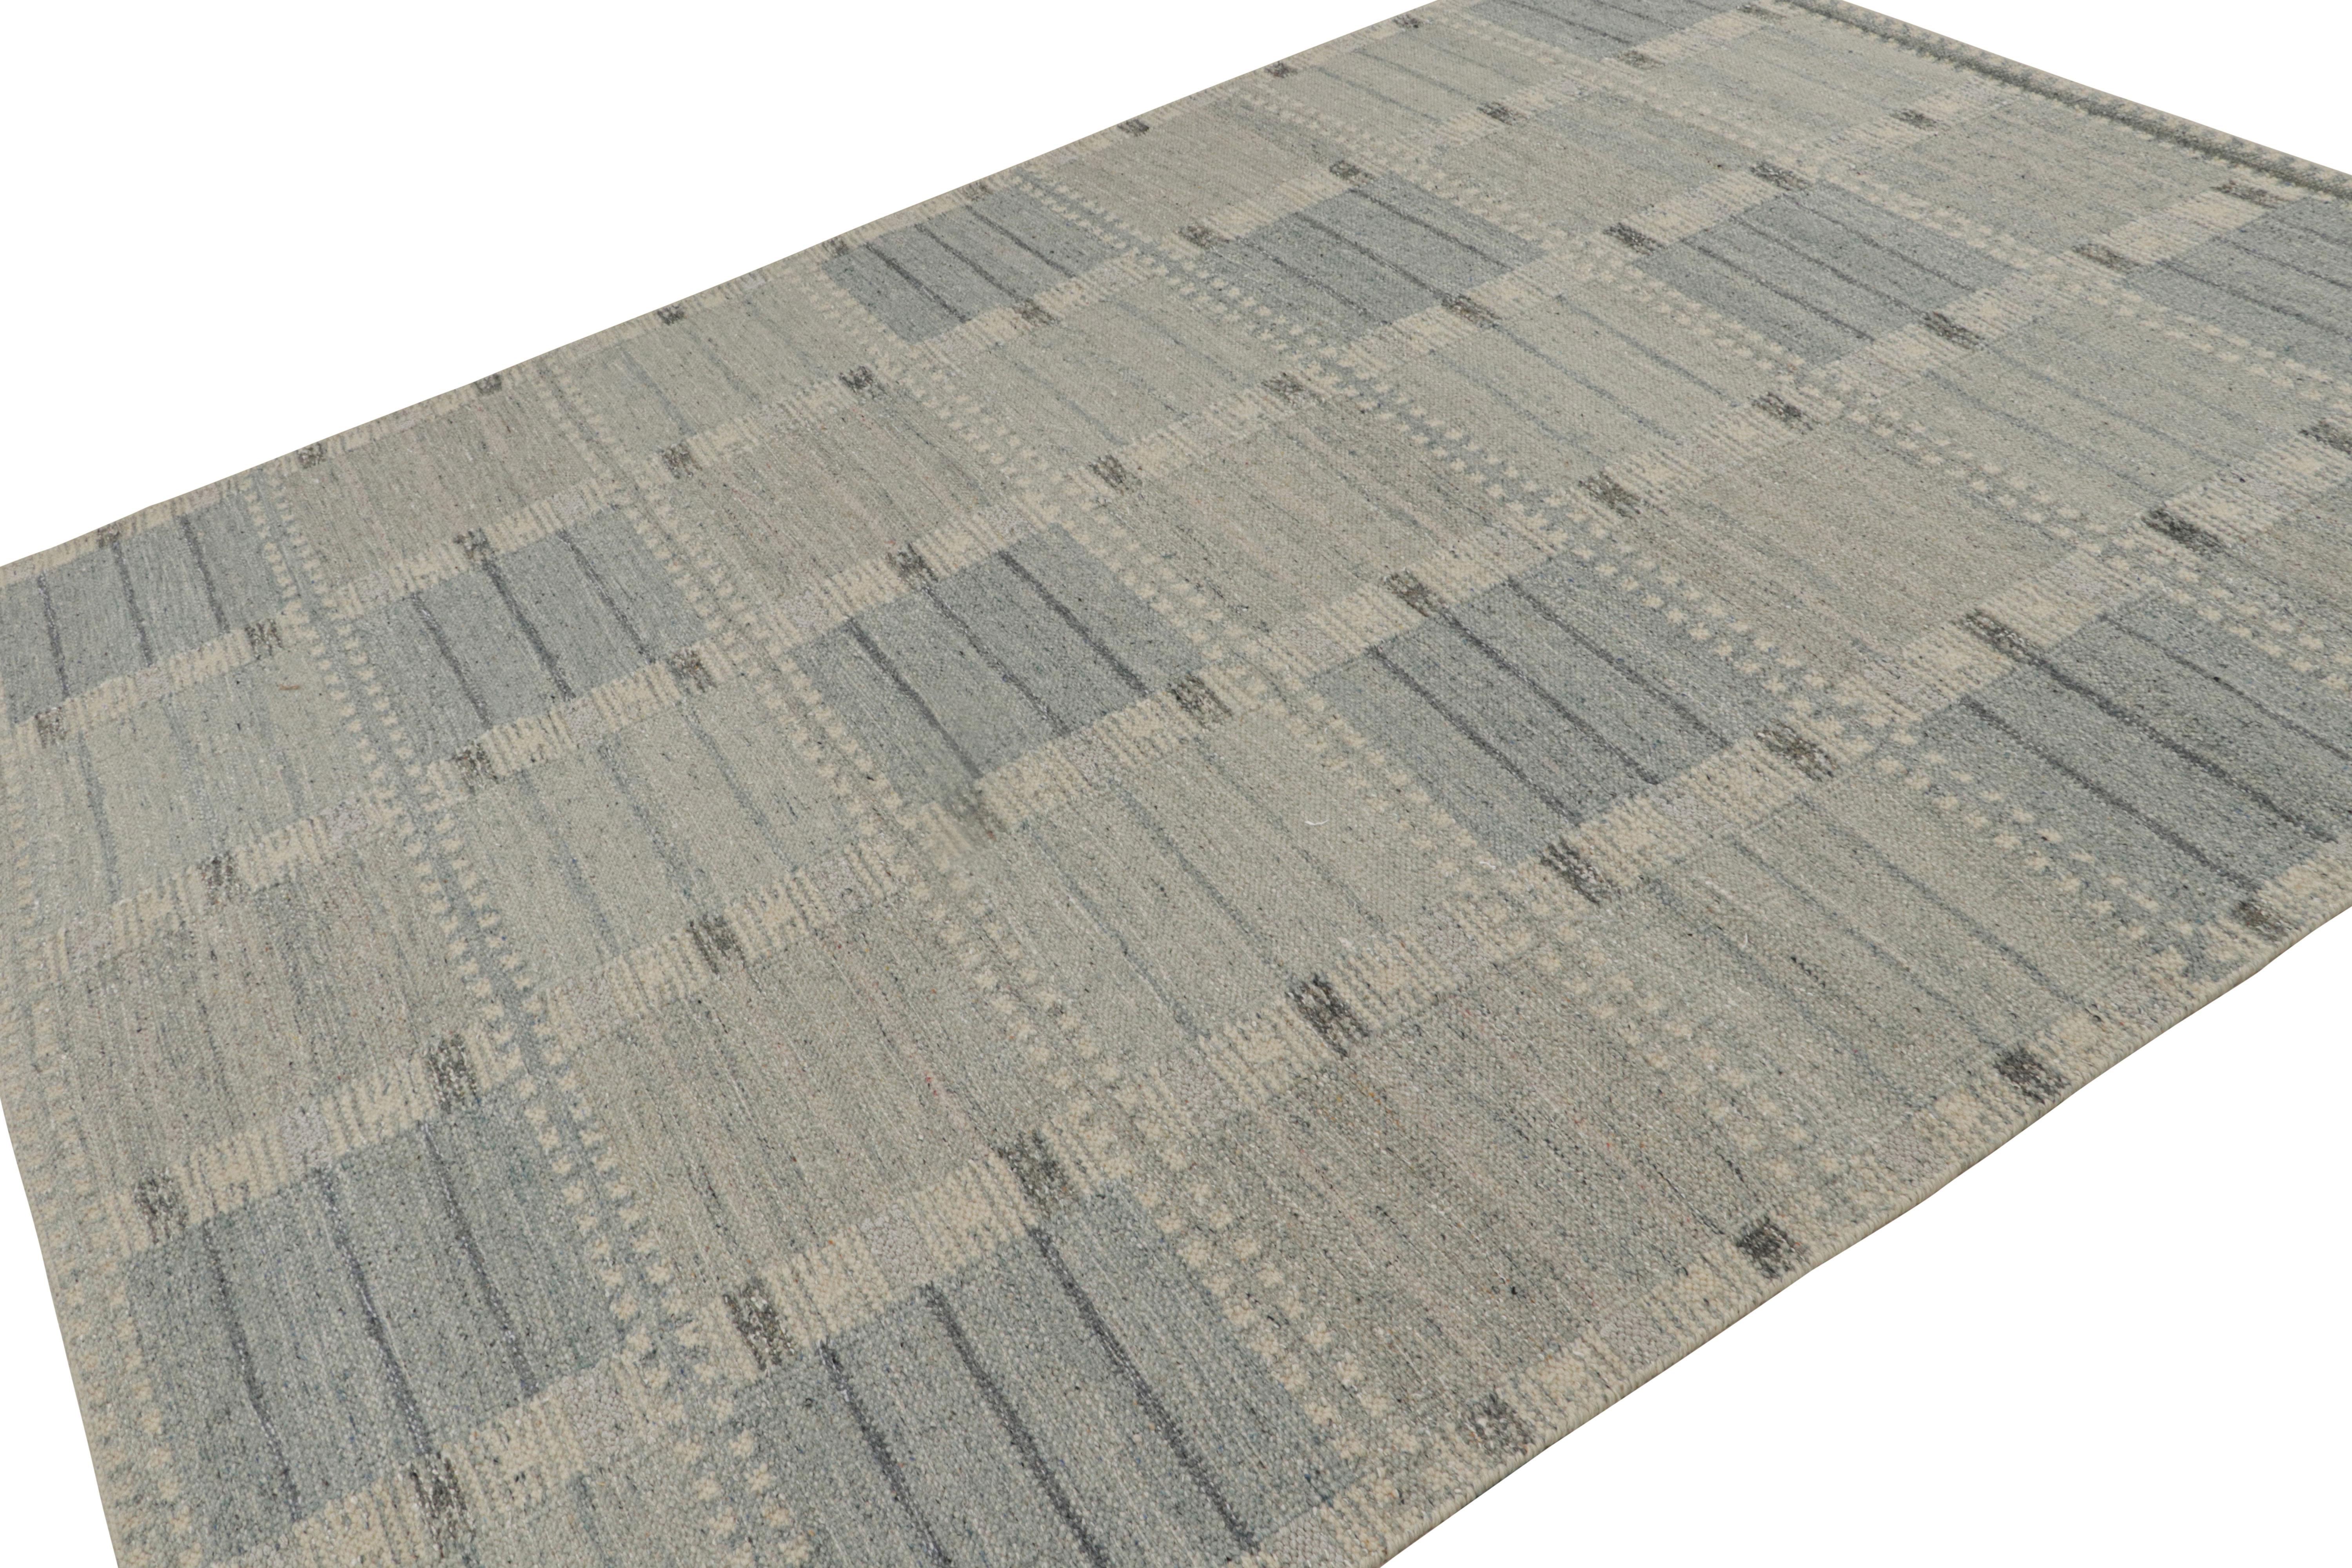 Handwoven in wool, cotton and other undyed natural yarns, this 8x10 Scandinavian kilim rug features geometric patterns in the Swedish minimalist-meets-mid-century modern look. 

On the design: 

Admirers of the craft may admire our 8x10 rug from our